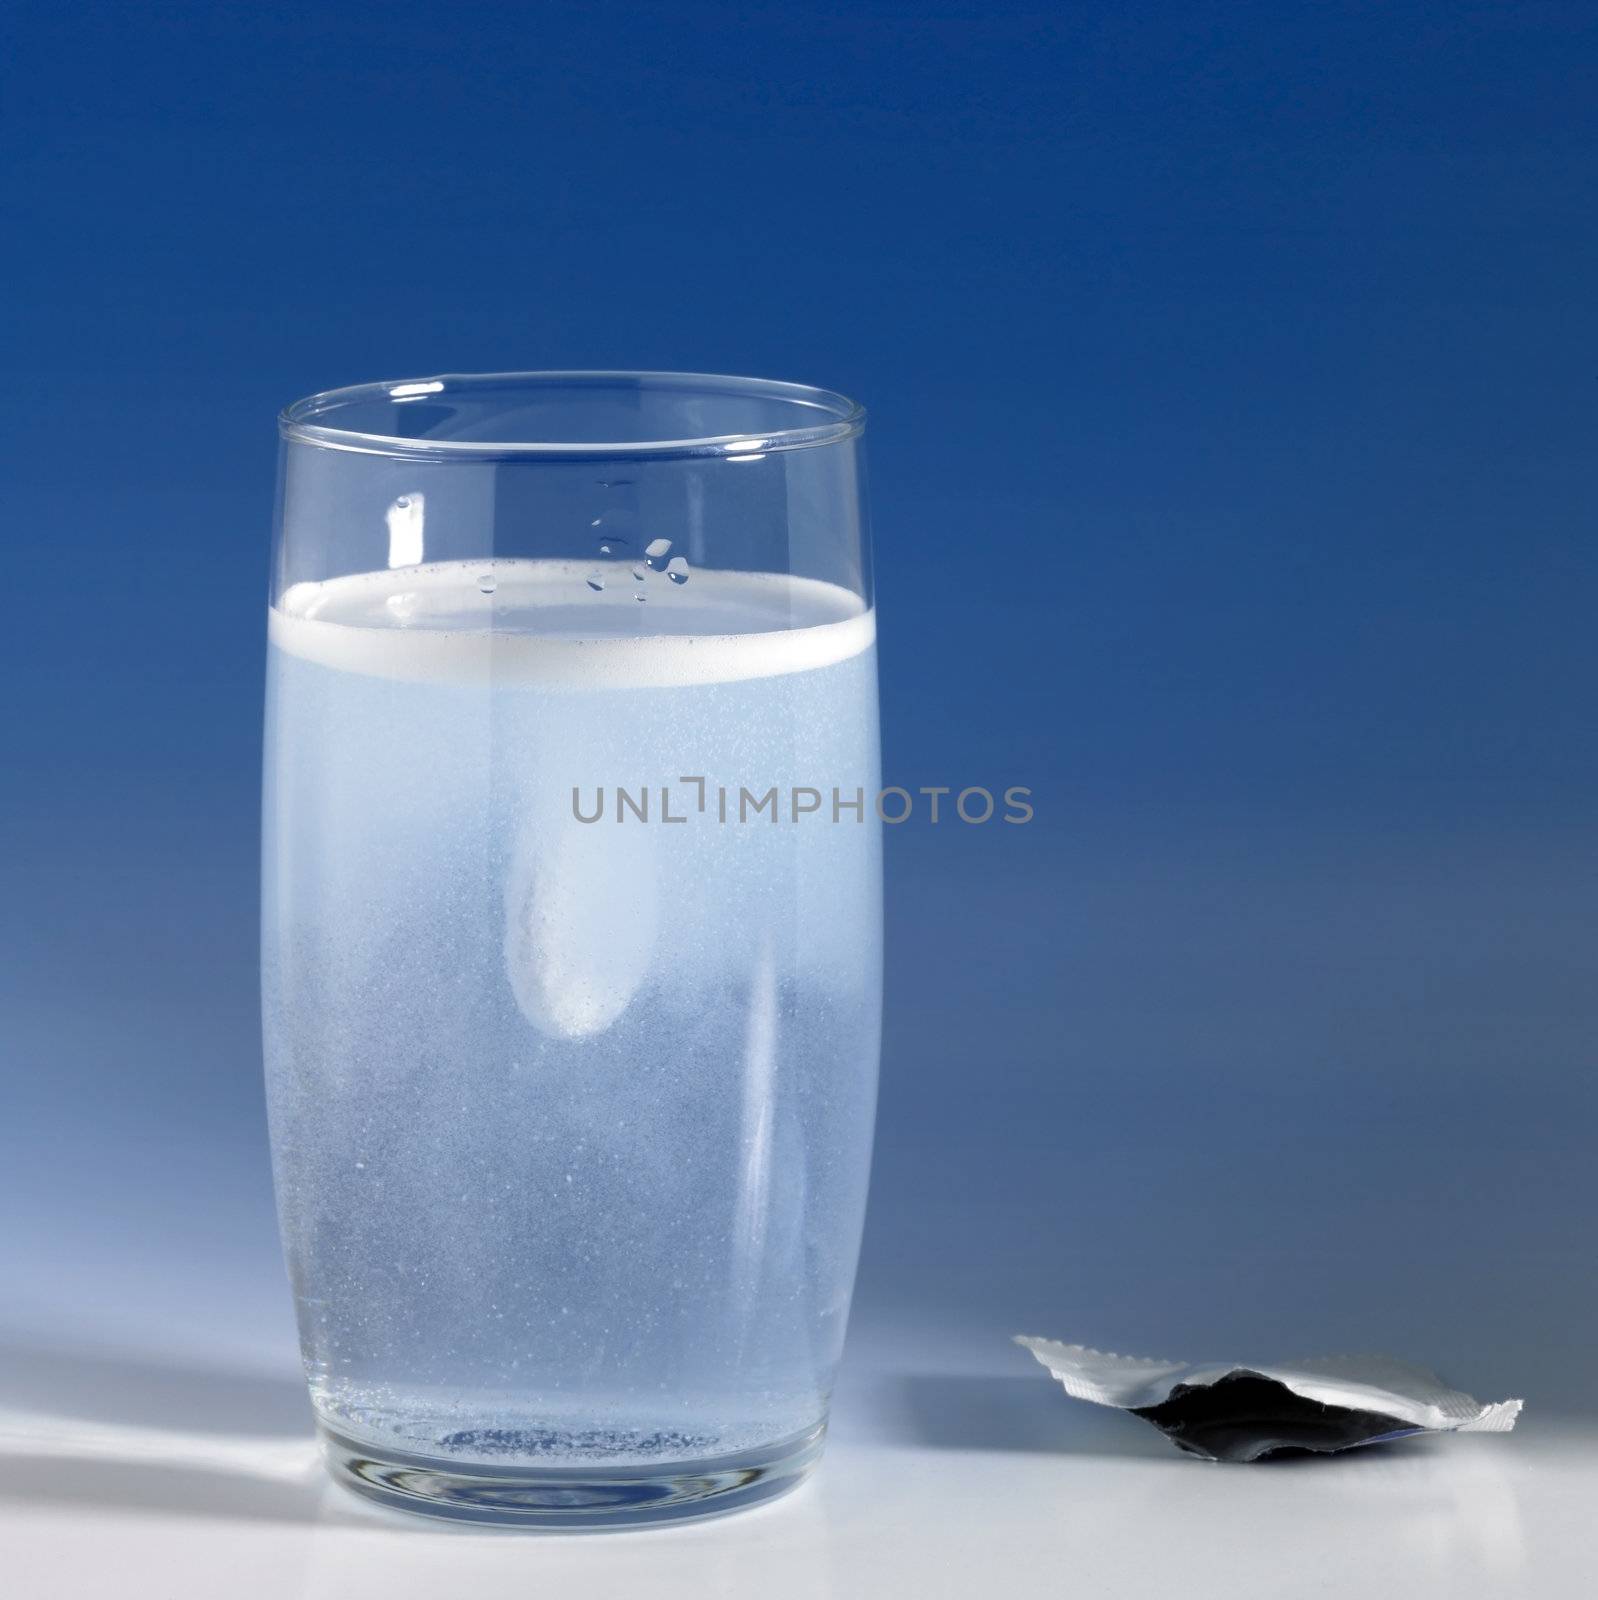 fizzy tablet in a glass of water by gewoldi